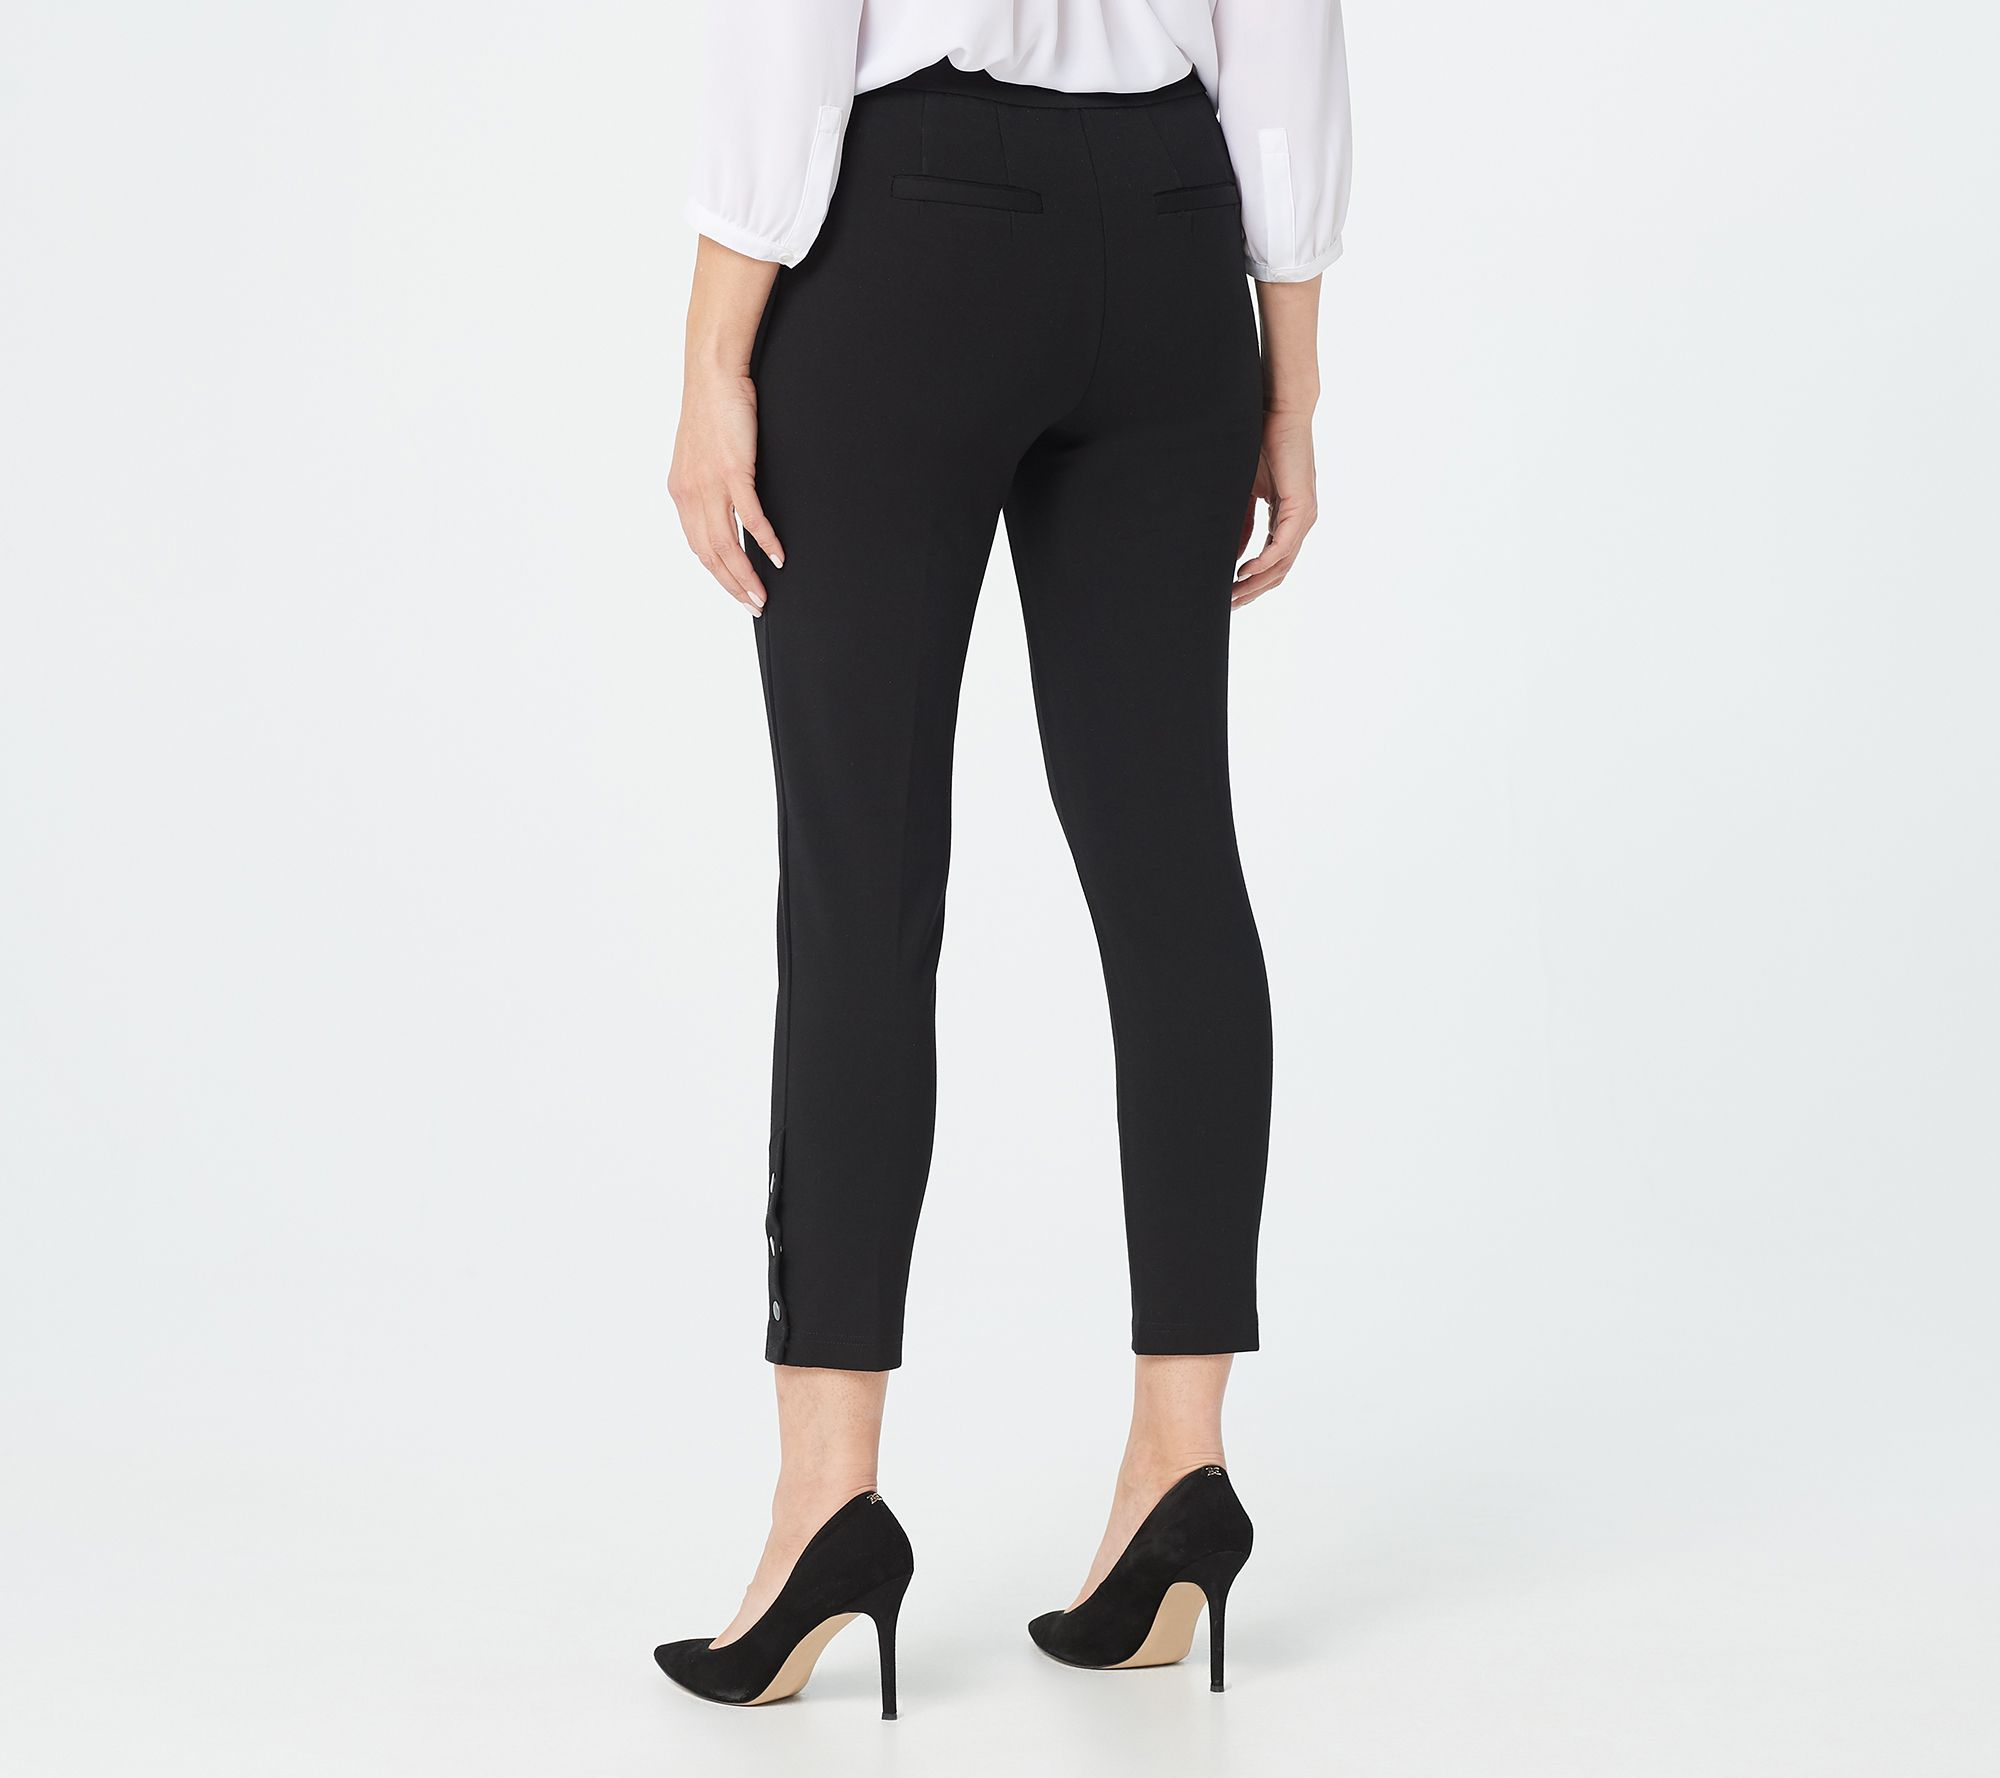 Joan Rivers Regular Signature Knit Ankle Pants with Snap Cuffs - QVC.com